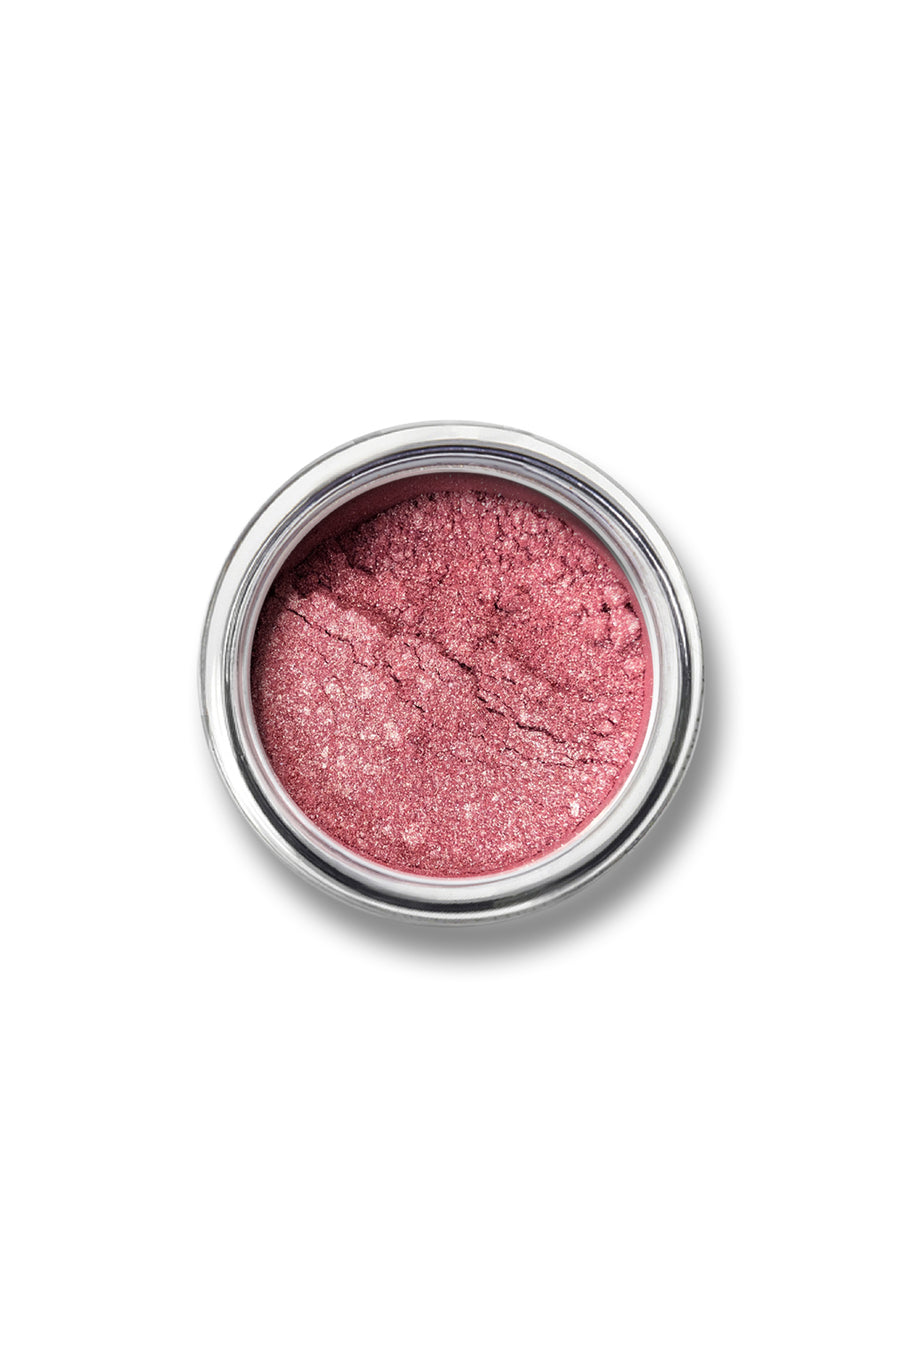 Shimmer Eyeshadow #18 - Peachy Pink - Blend Mineral Cosmetics